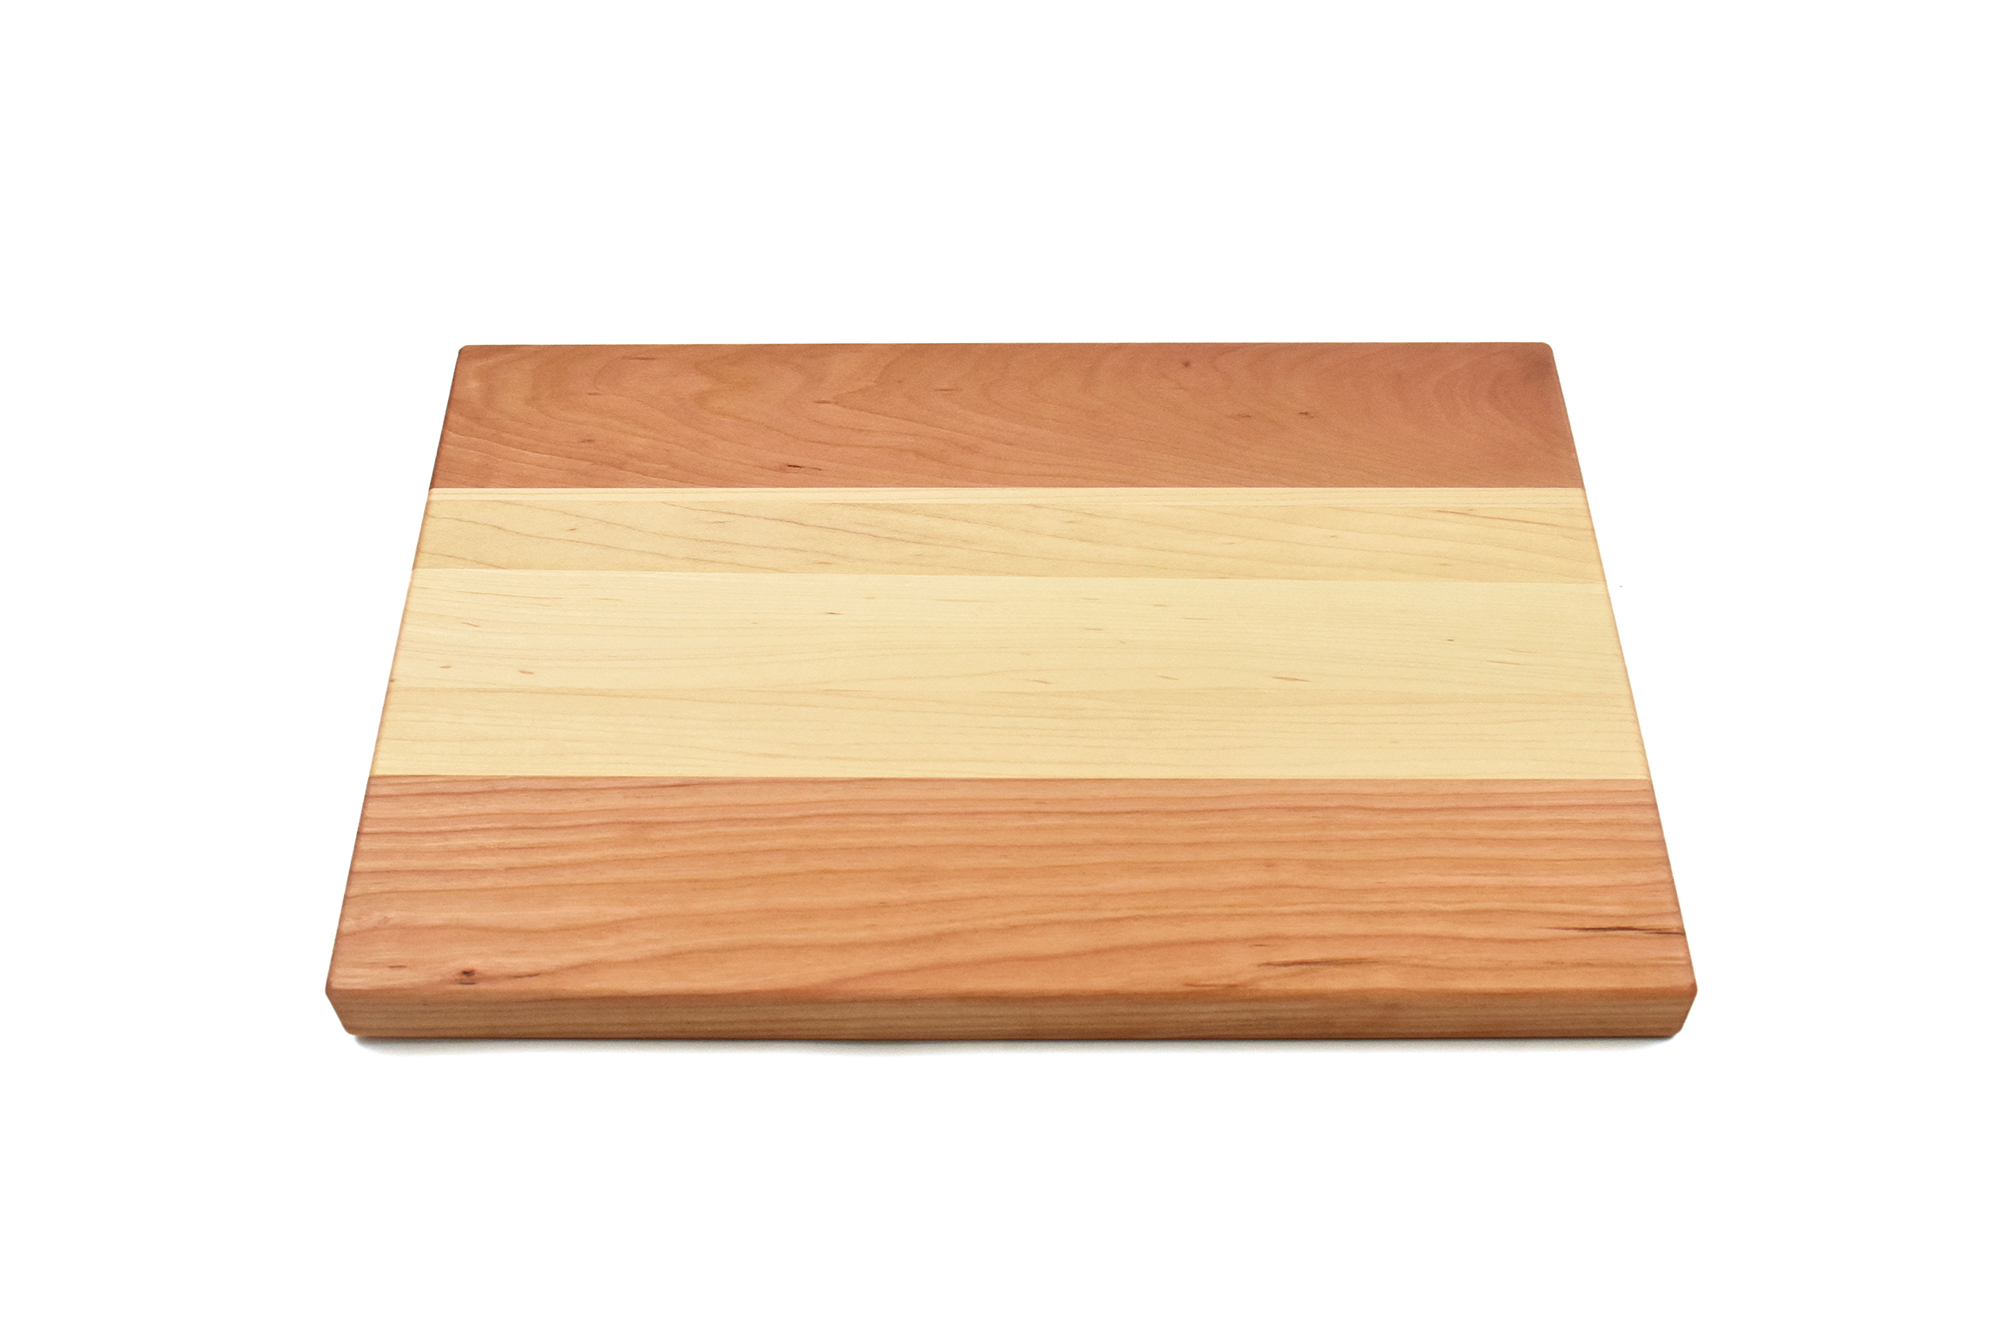 Multi wood species cutting board with maple in the middle